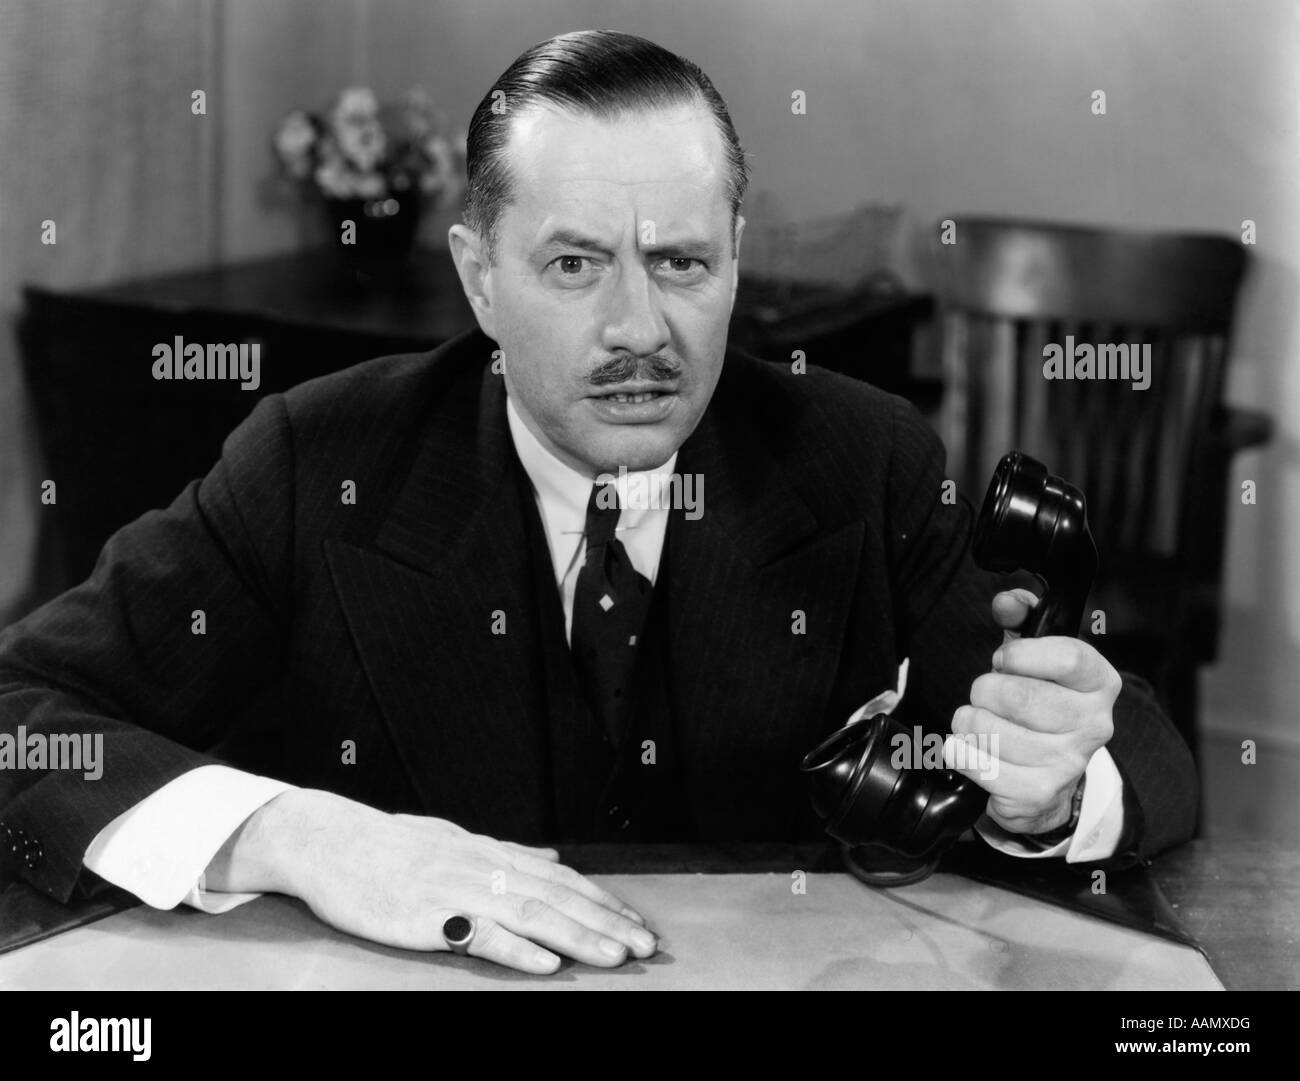 1930s 1940s PORTRAIT OF BUSINESS MAN SITTING AT OFFICE DESK HOLDING PHONE IN ONE HAND SERIOUS FACIAL EXPRESSION MOUSTACHE Stock Photo